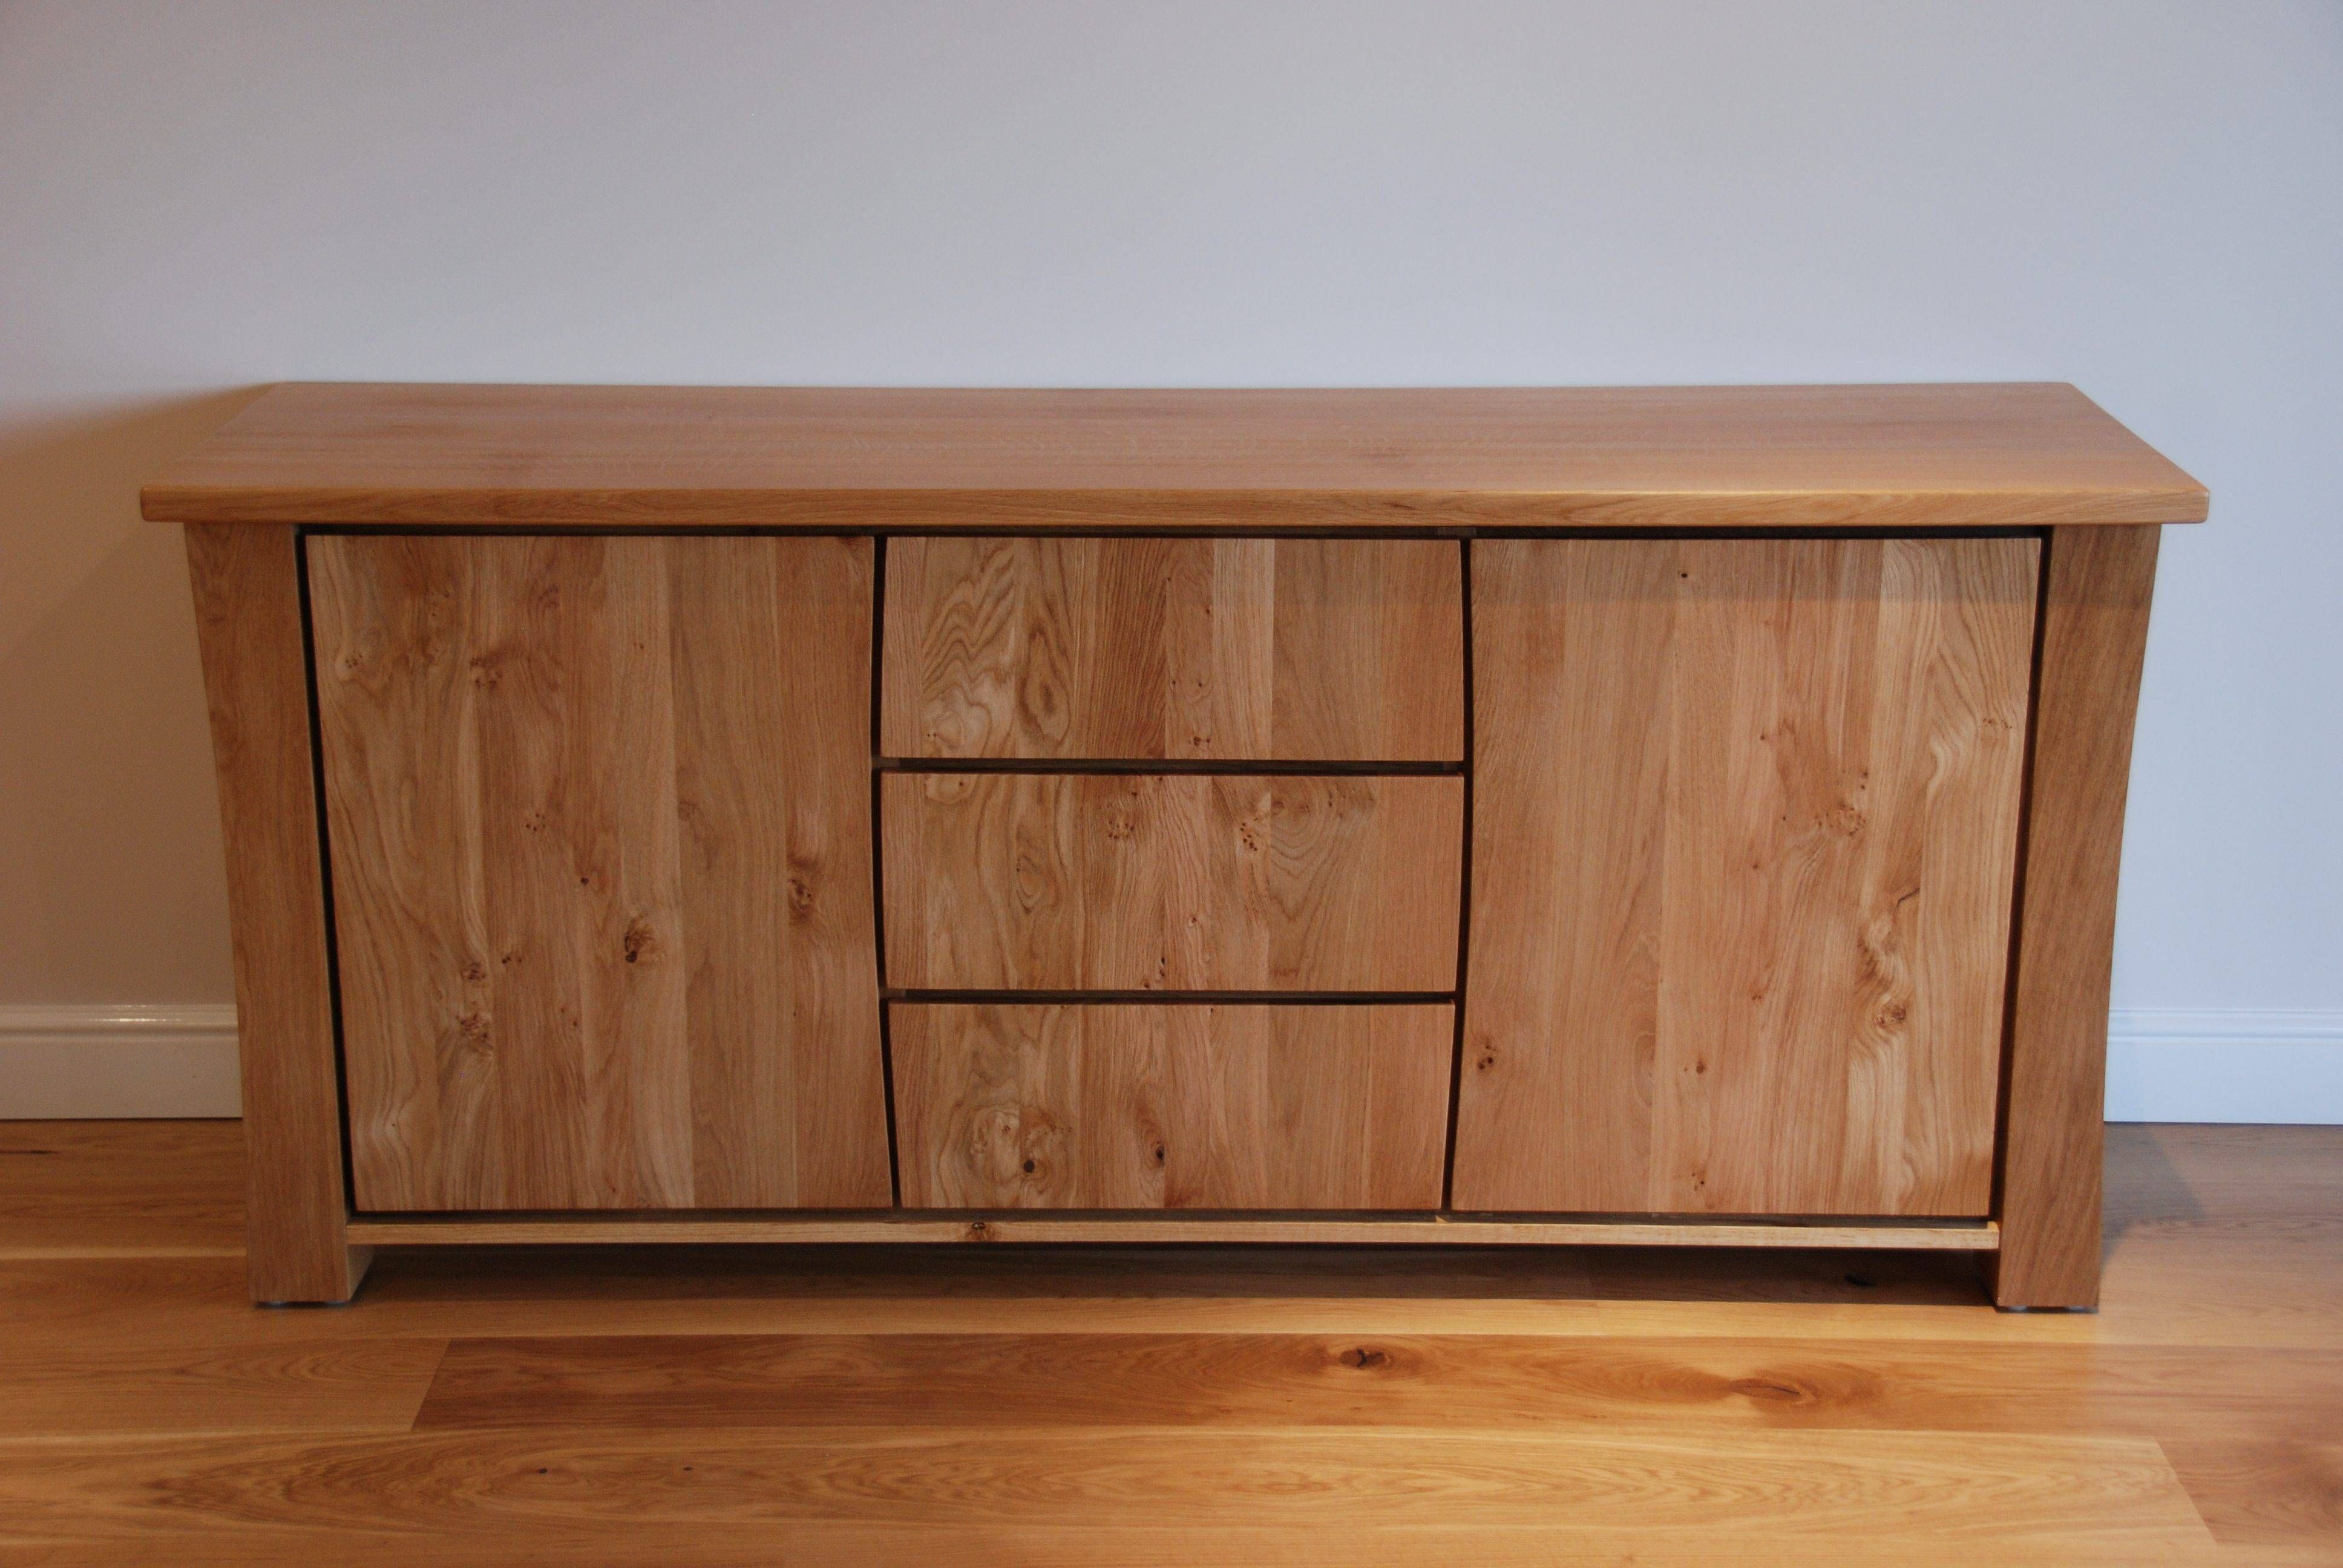 Sideboard And Tv Unit Commission | Bespokegreenoak For Newest Sideboards And Tv Units (Photo 1 of 15)